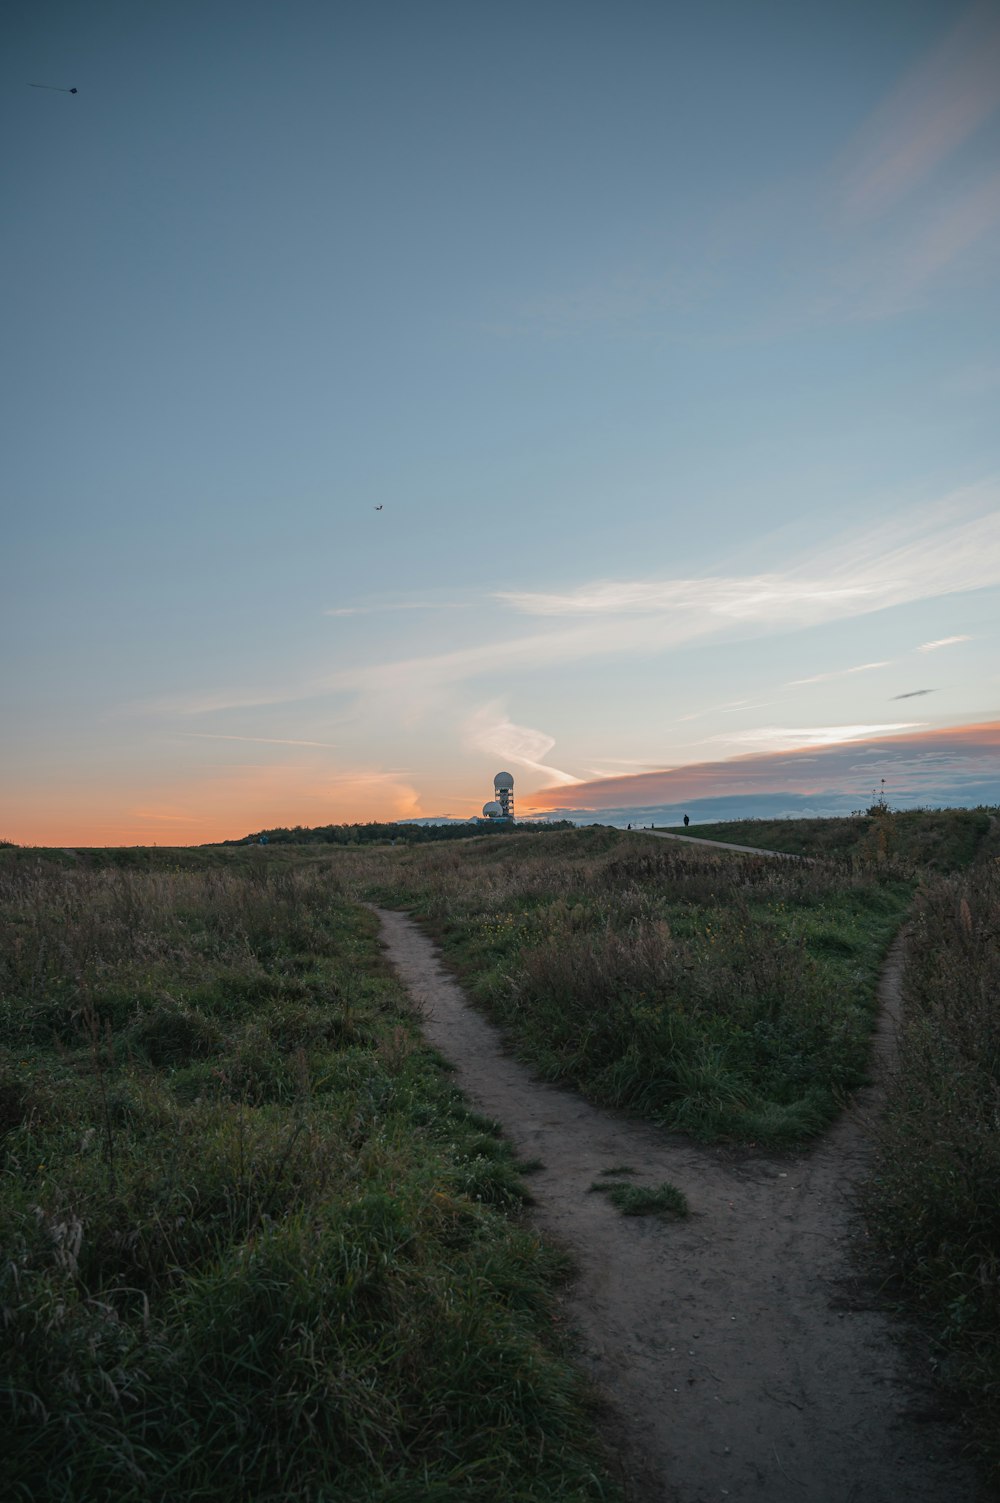 a dirt path in a grassy field with a lighthouse in the distance